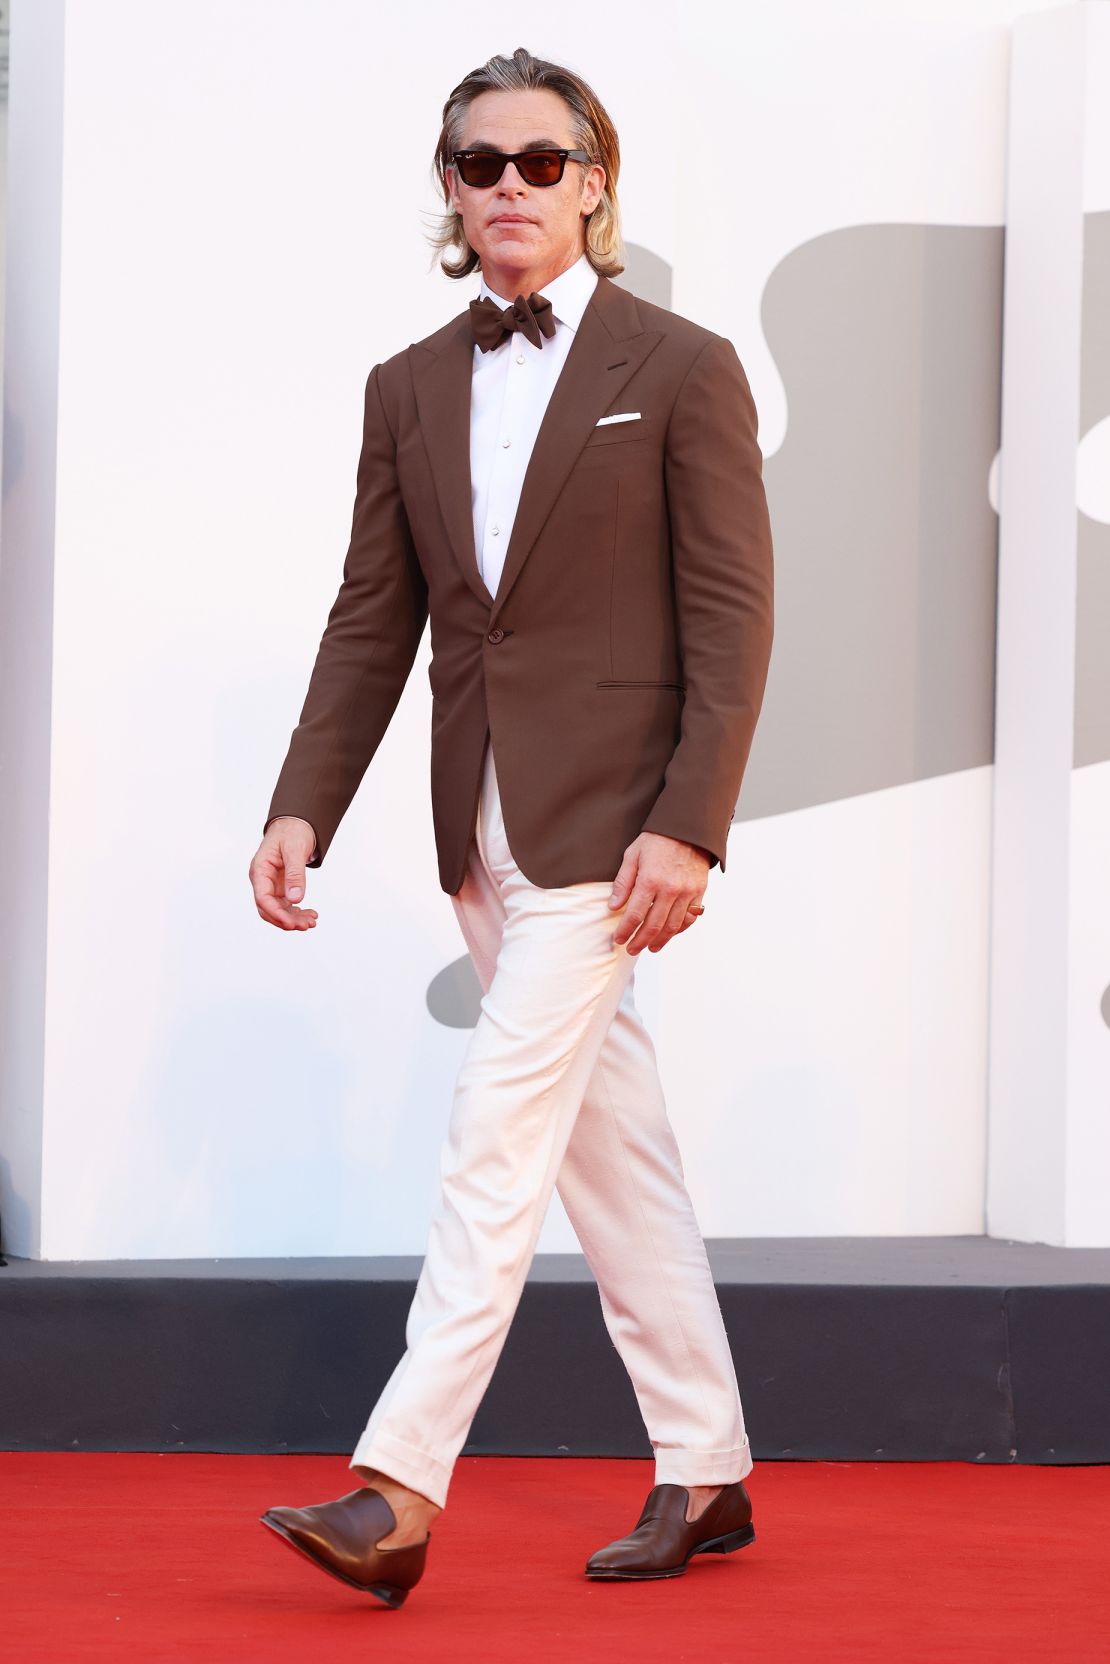 Chris Pine at the "Don't Worry Darling" red carpet at the 79th Venice International Film Festival in September, 2022.